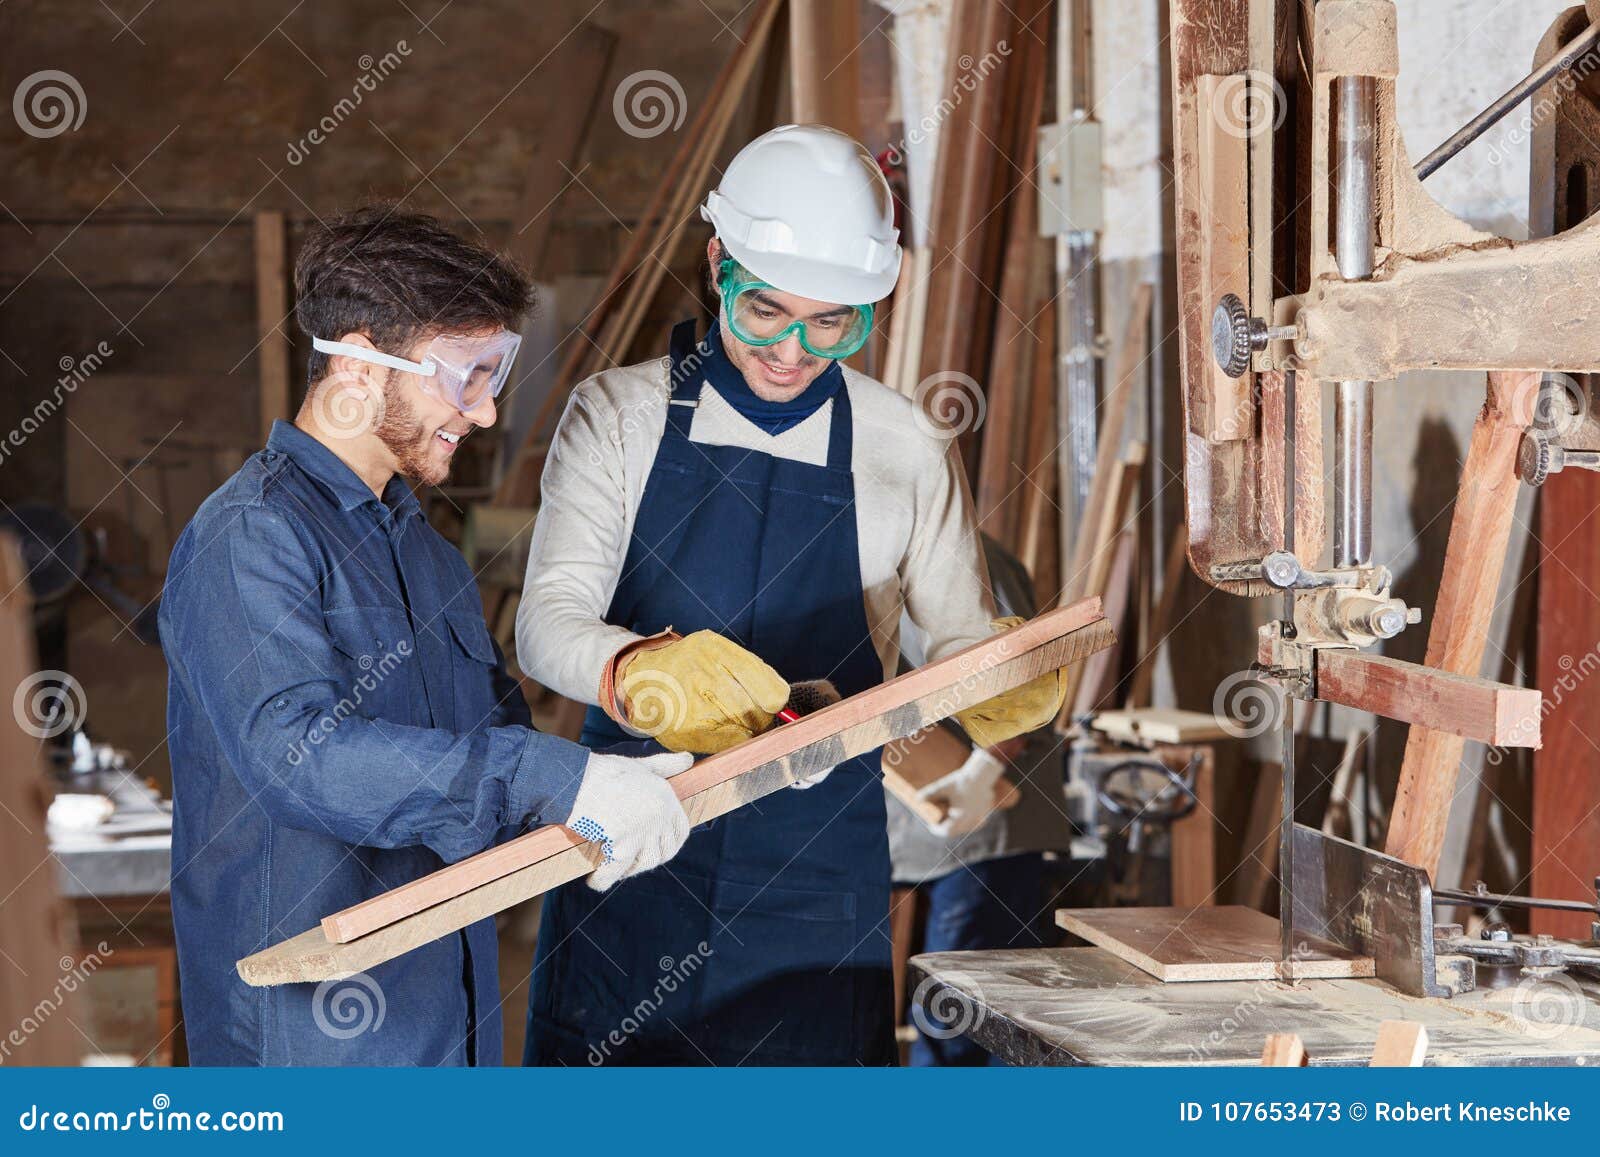 carpentry-apprentice-during-lesson-stock-image-image-of-apprenticeship-protection-107653473